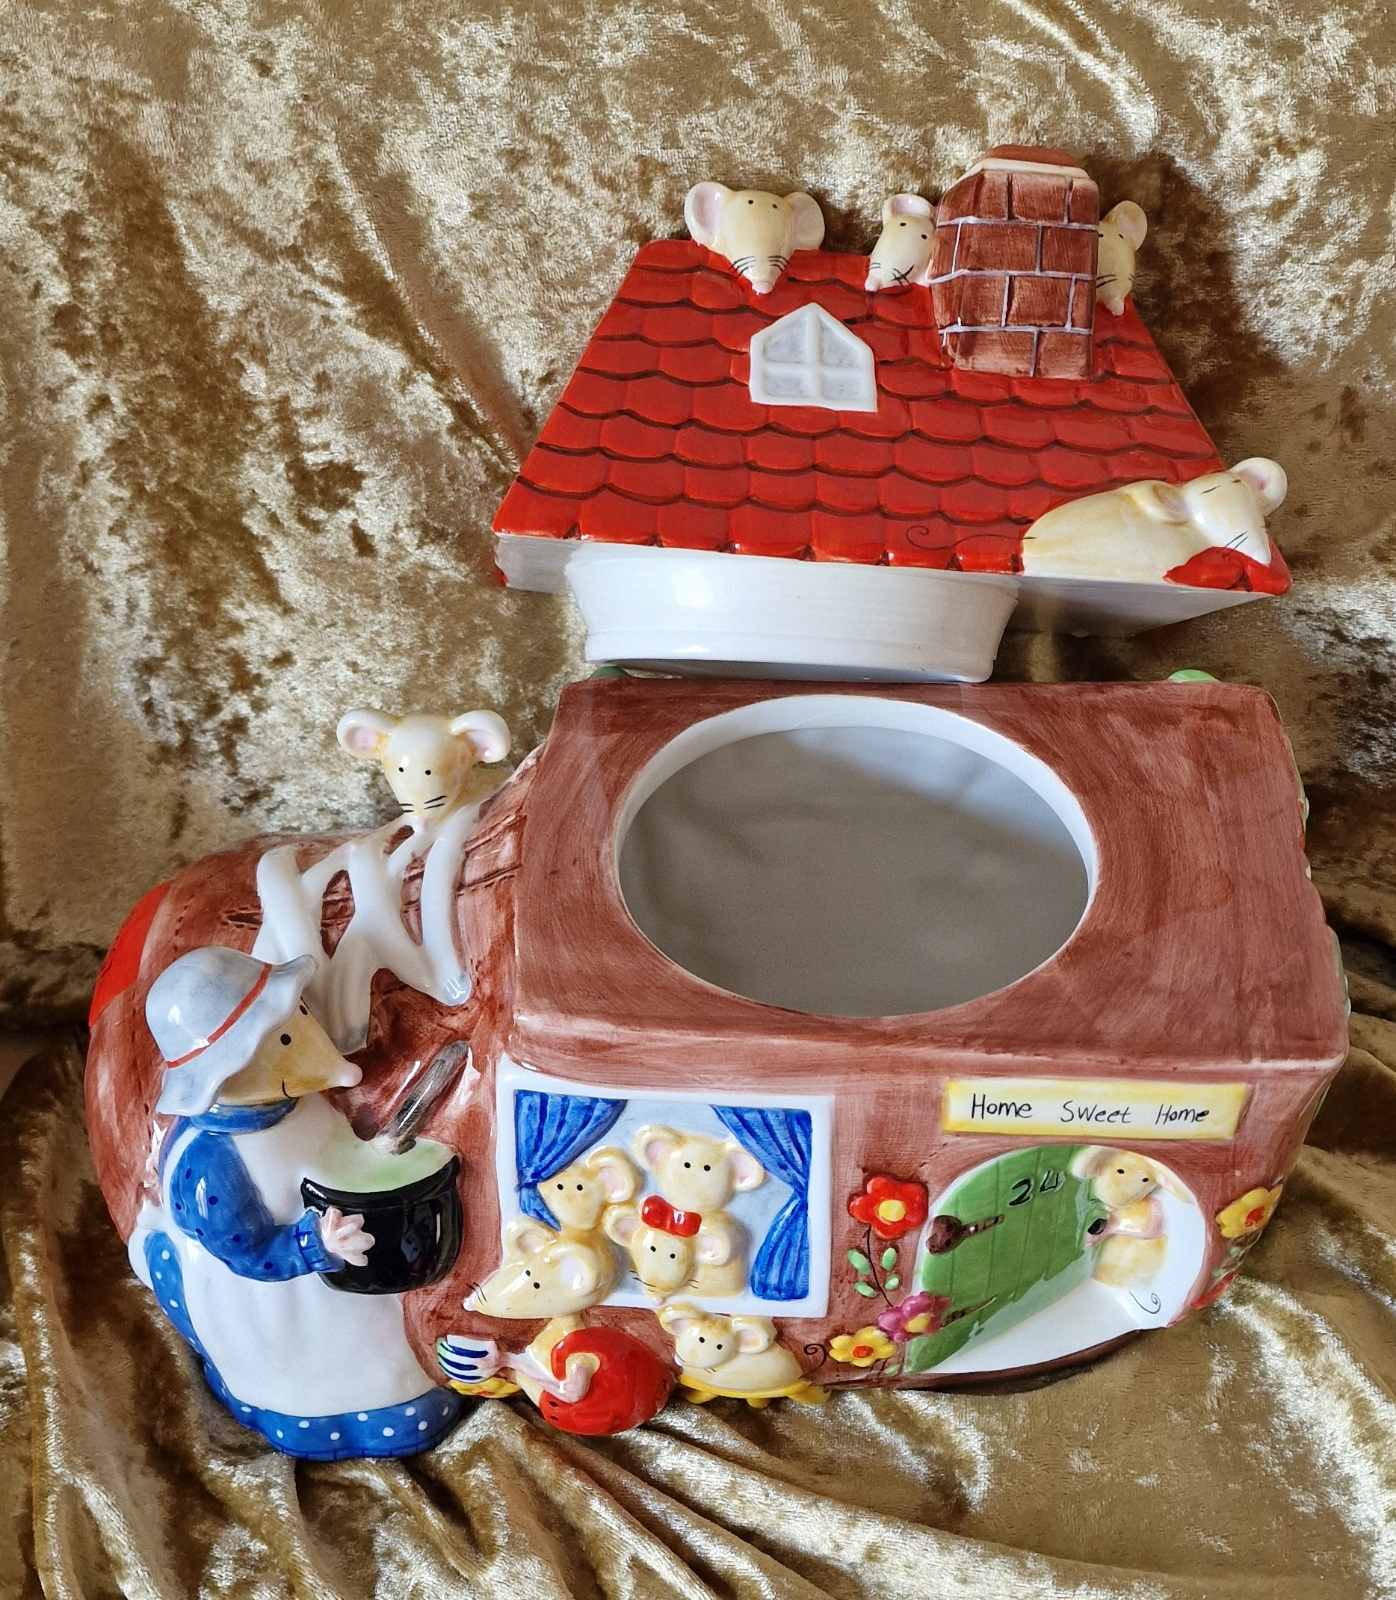 Rayware "Mouse House" Cookie Jar